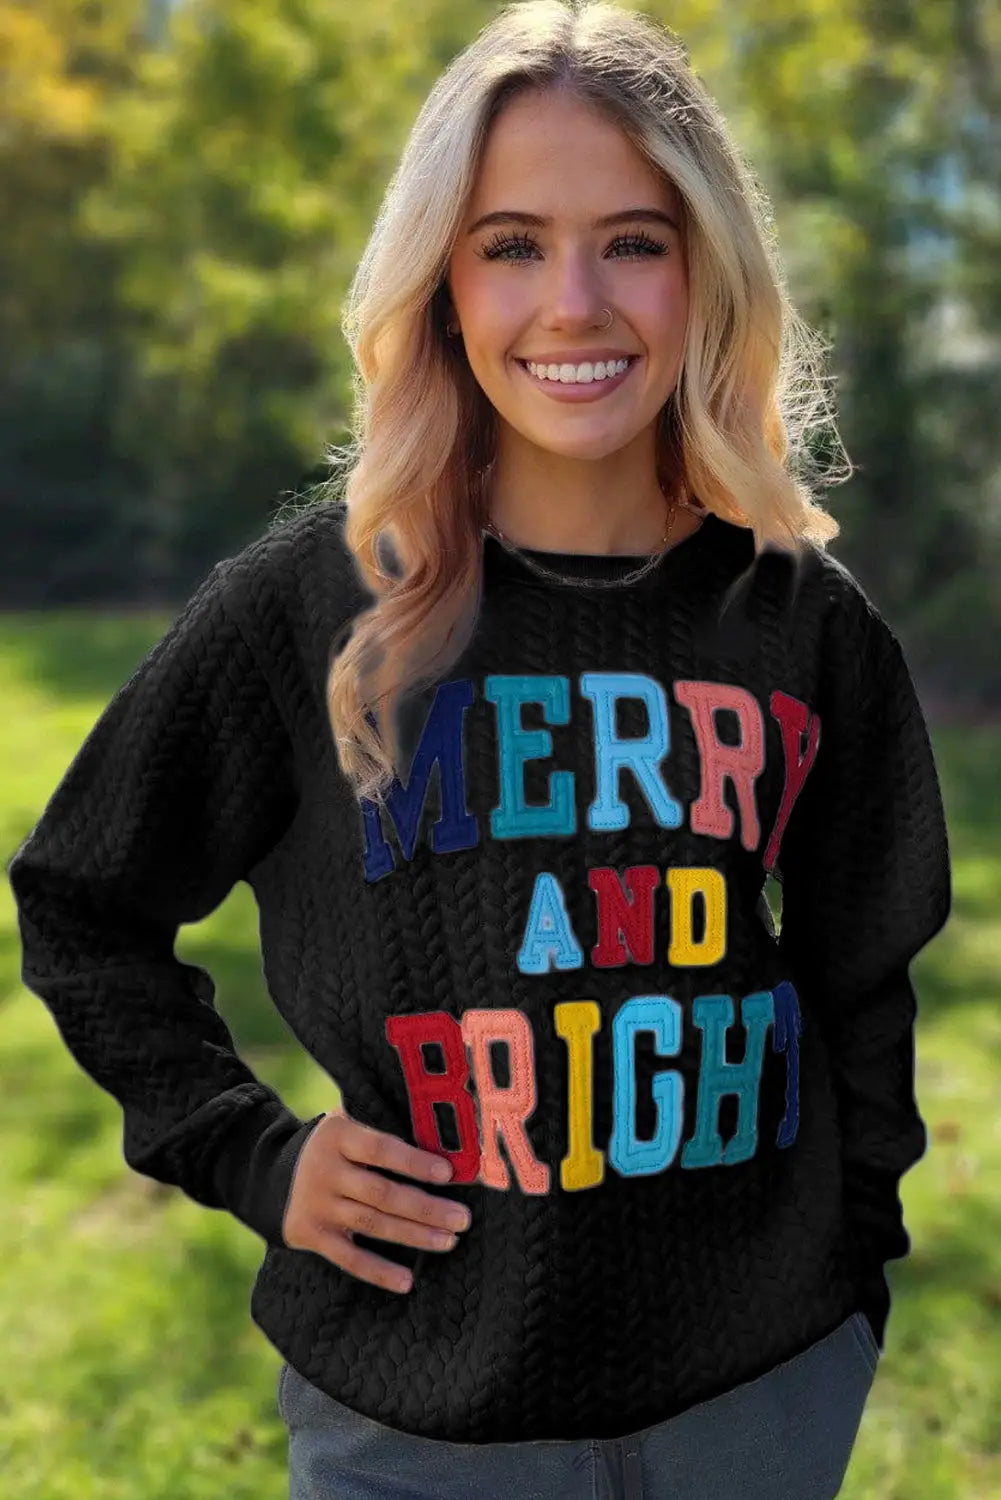 Black merry and bright cable knit pullover sweatshirt - sweatshits & hoodies